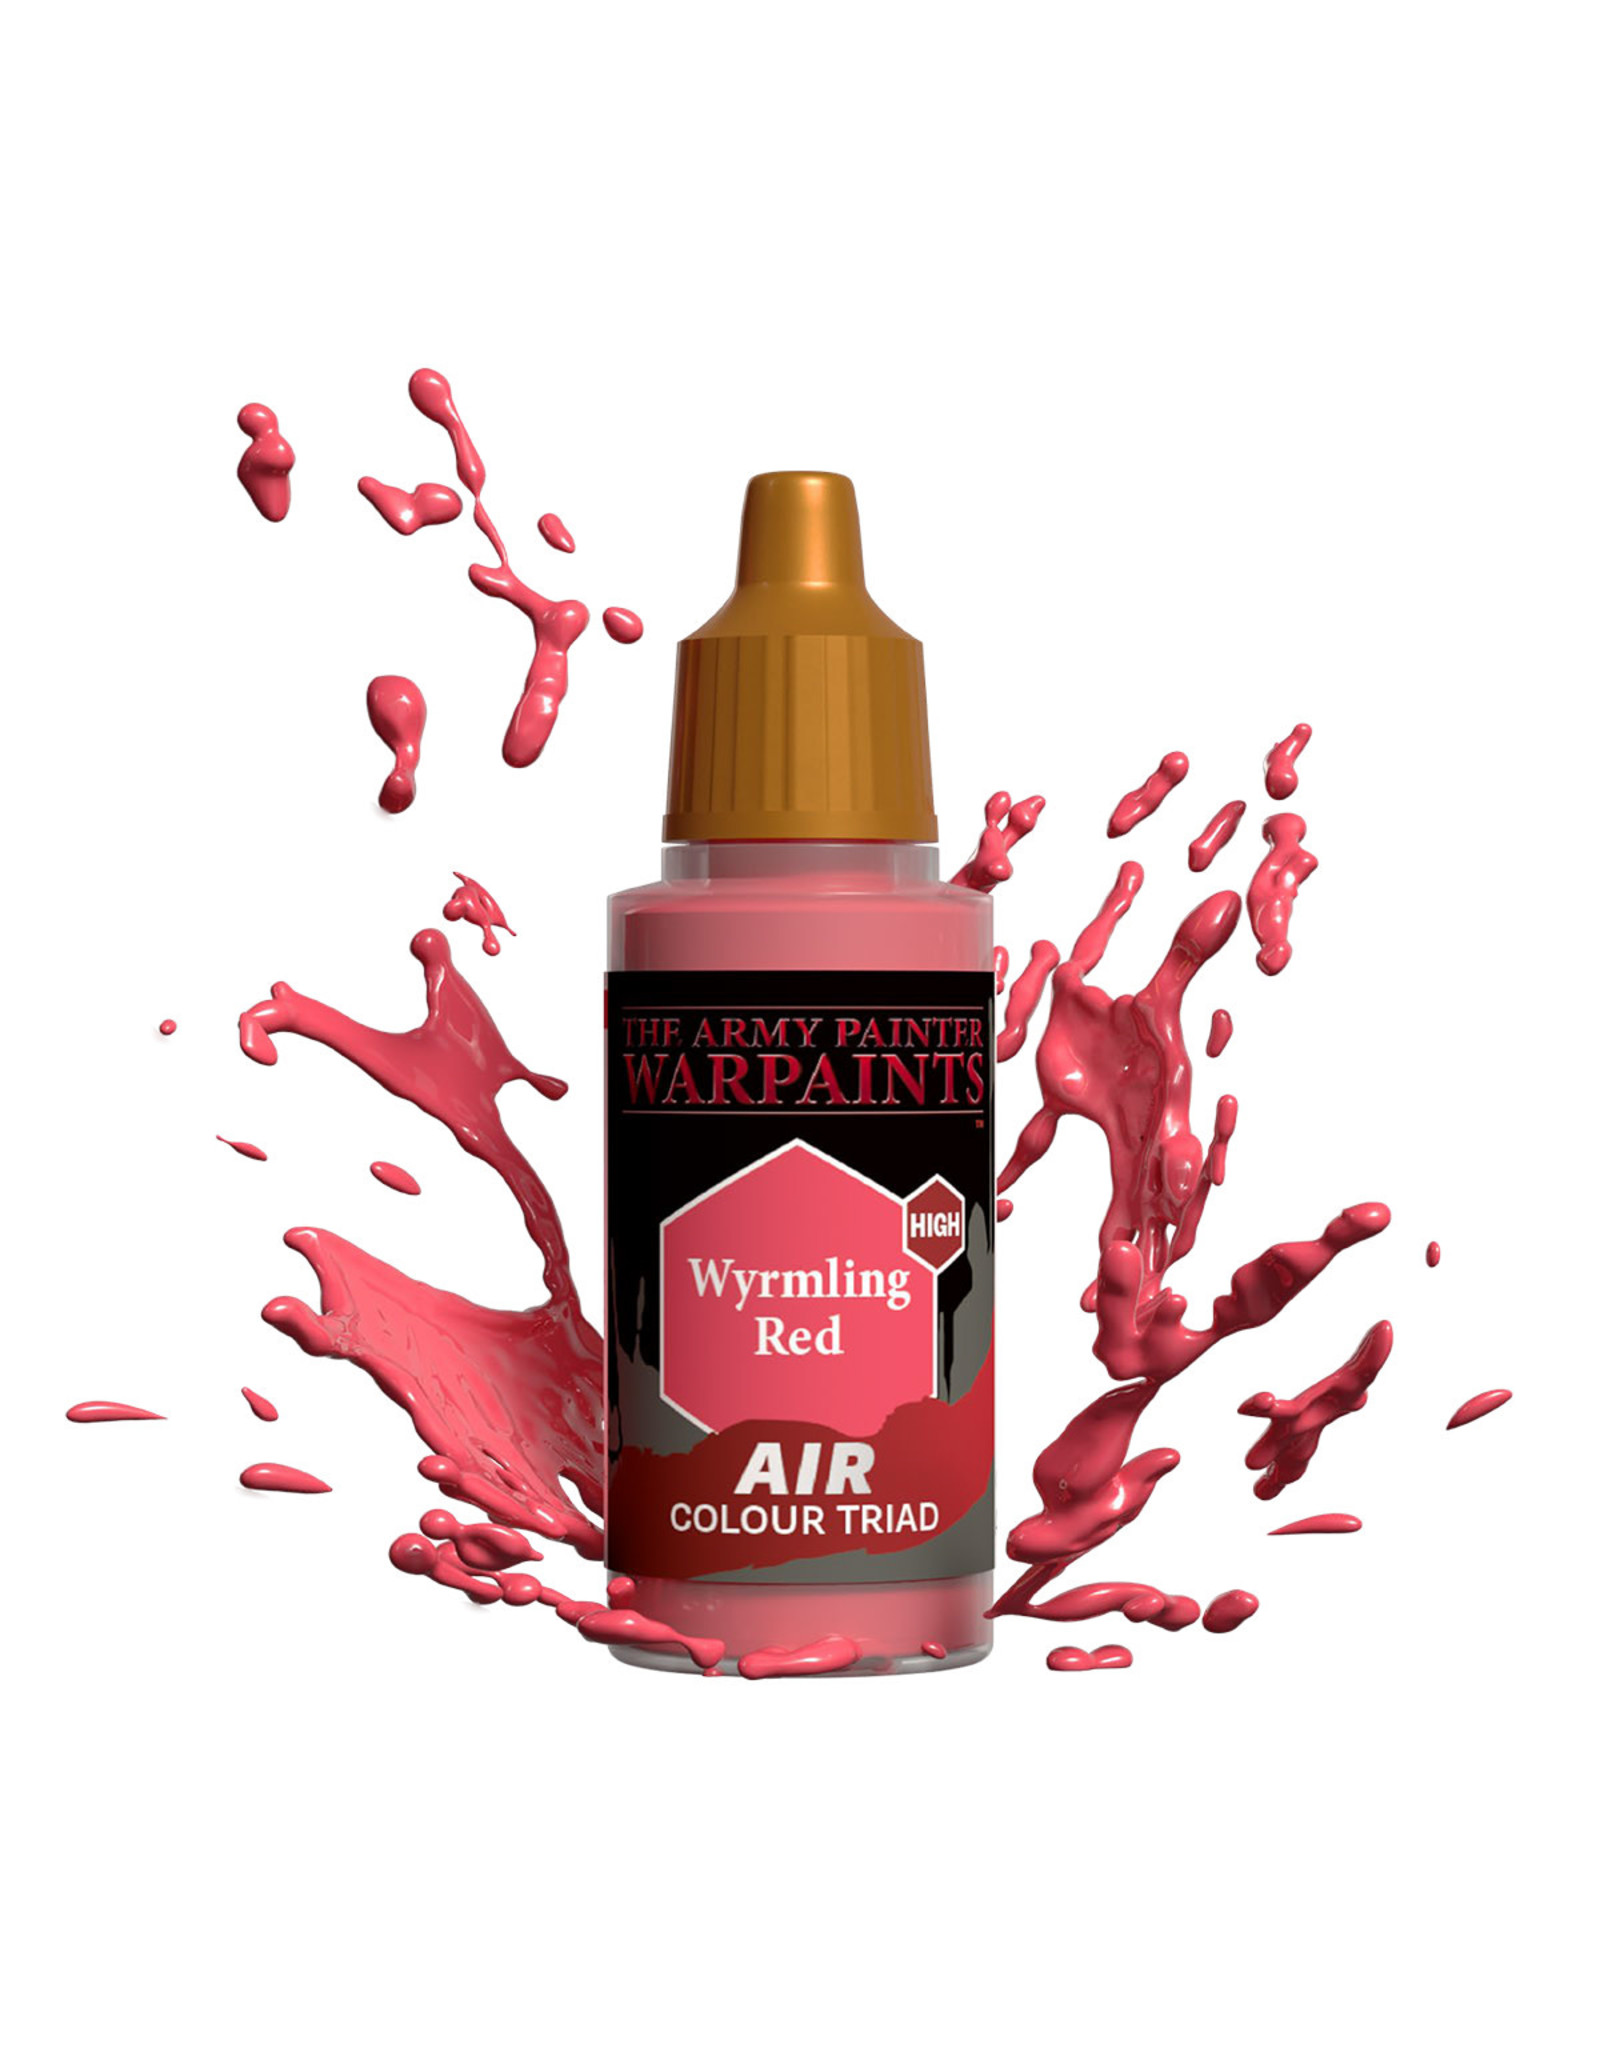 The Army Painter The Army Painter Warpaints Air: Wyrmling Red